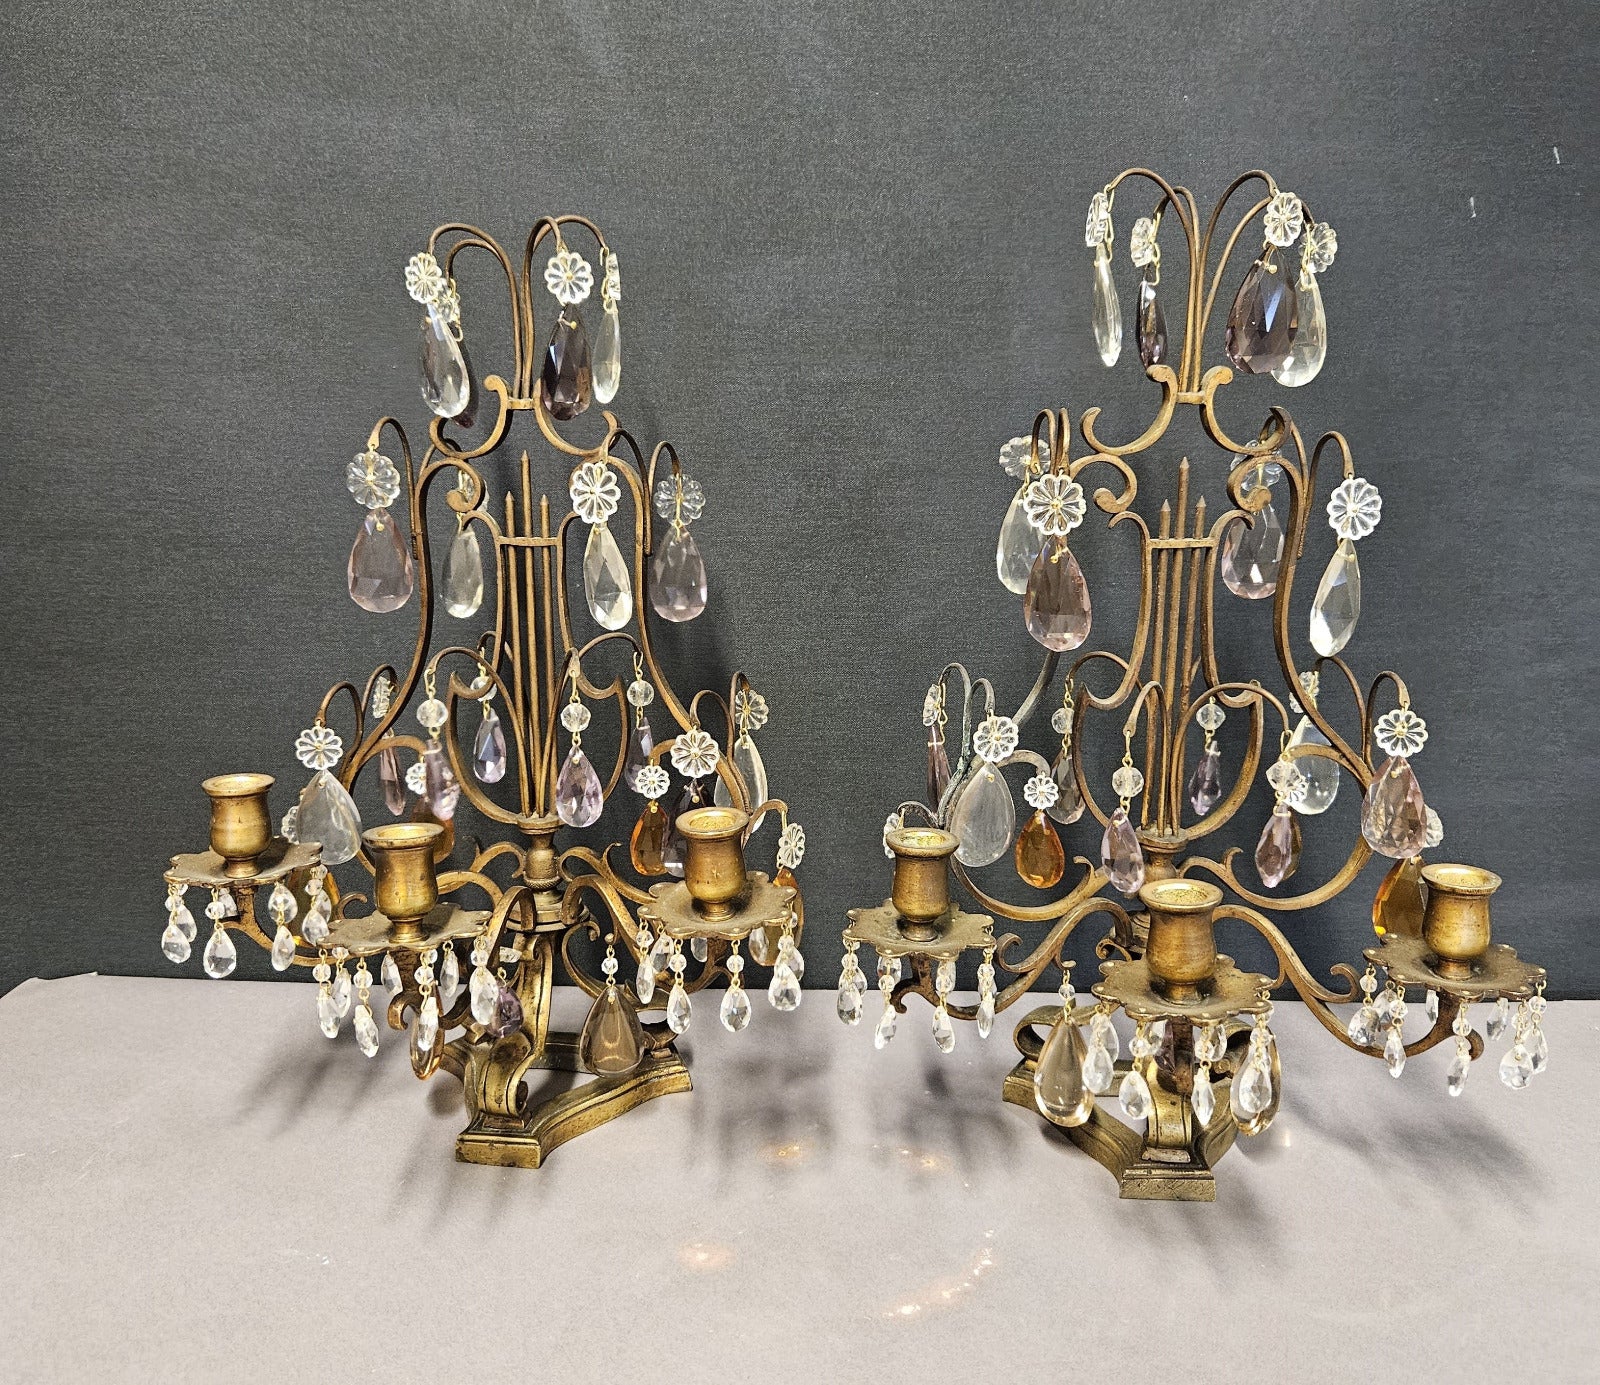 view of both candelabra